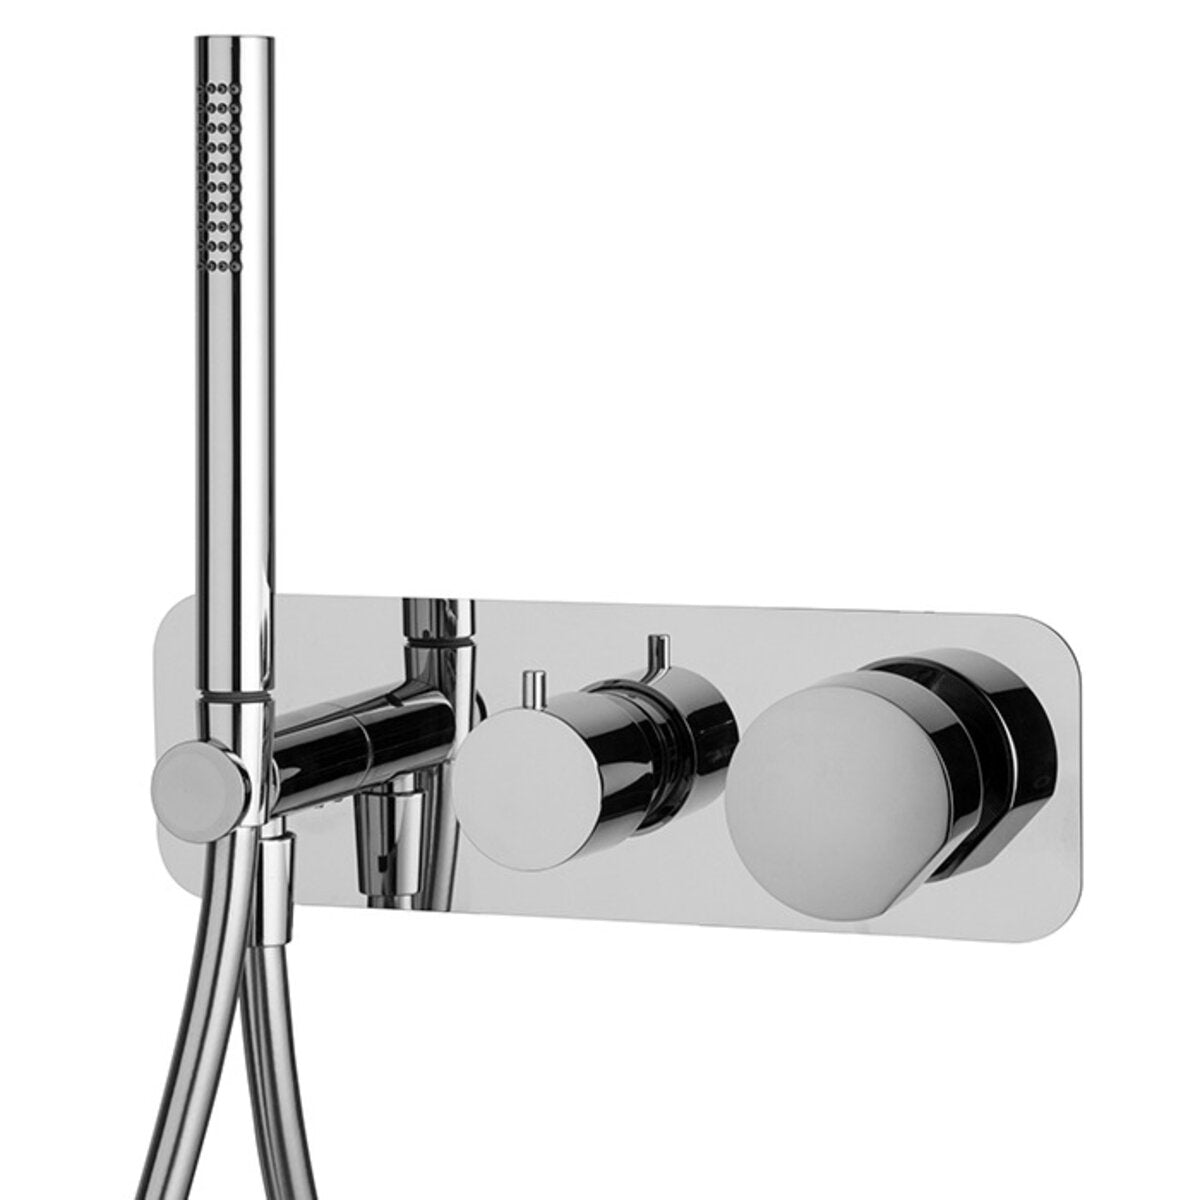 Fima Carlo Frattini So built-in shower mixer with diverter and shower set